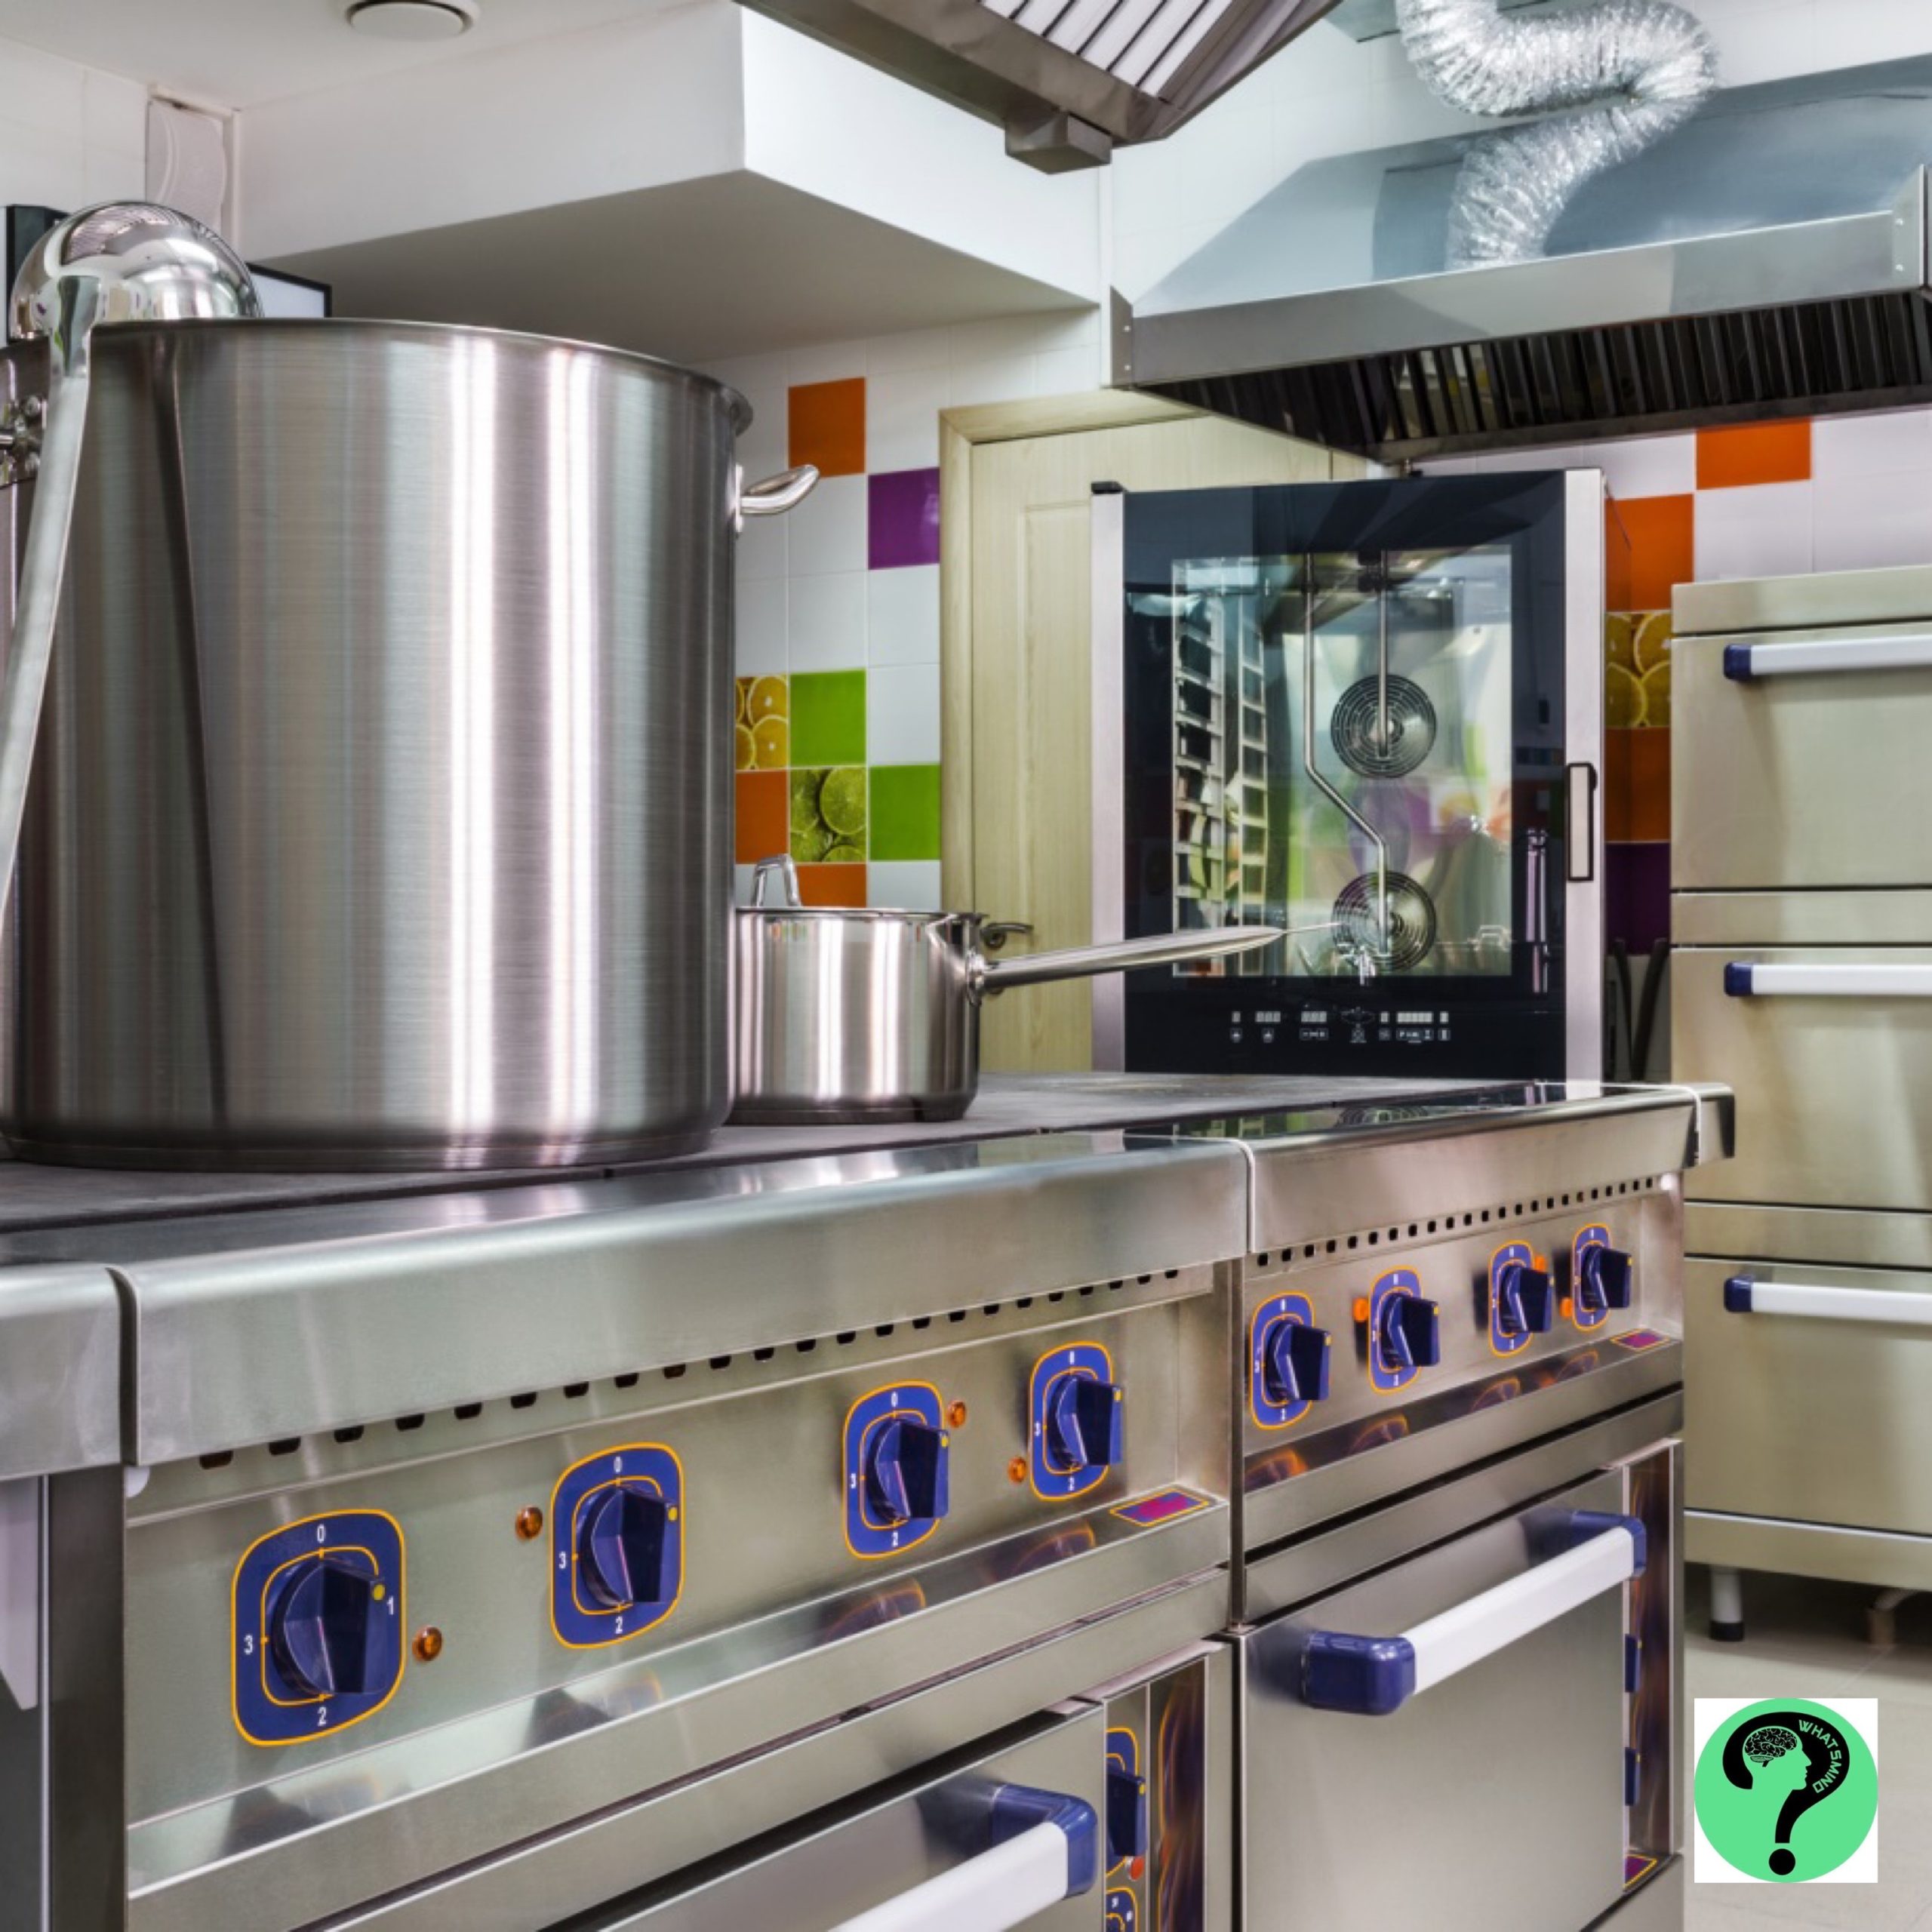 4 Restaurant Equipment Buying Mistakes and How to Avoid Them